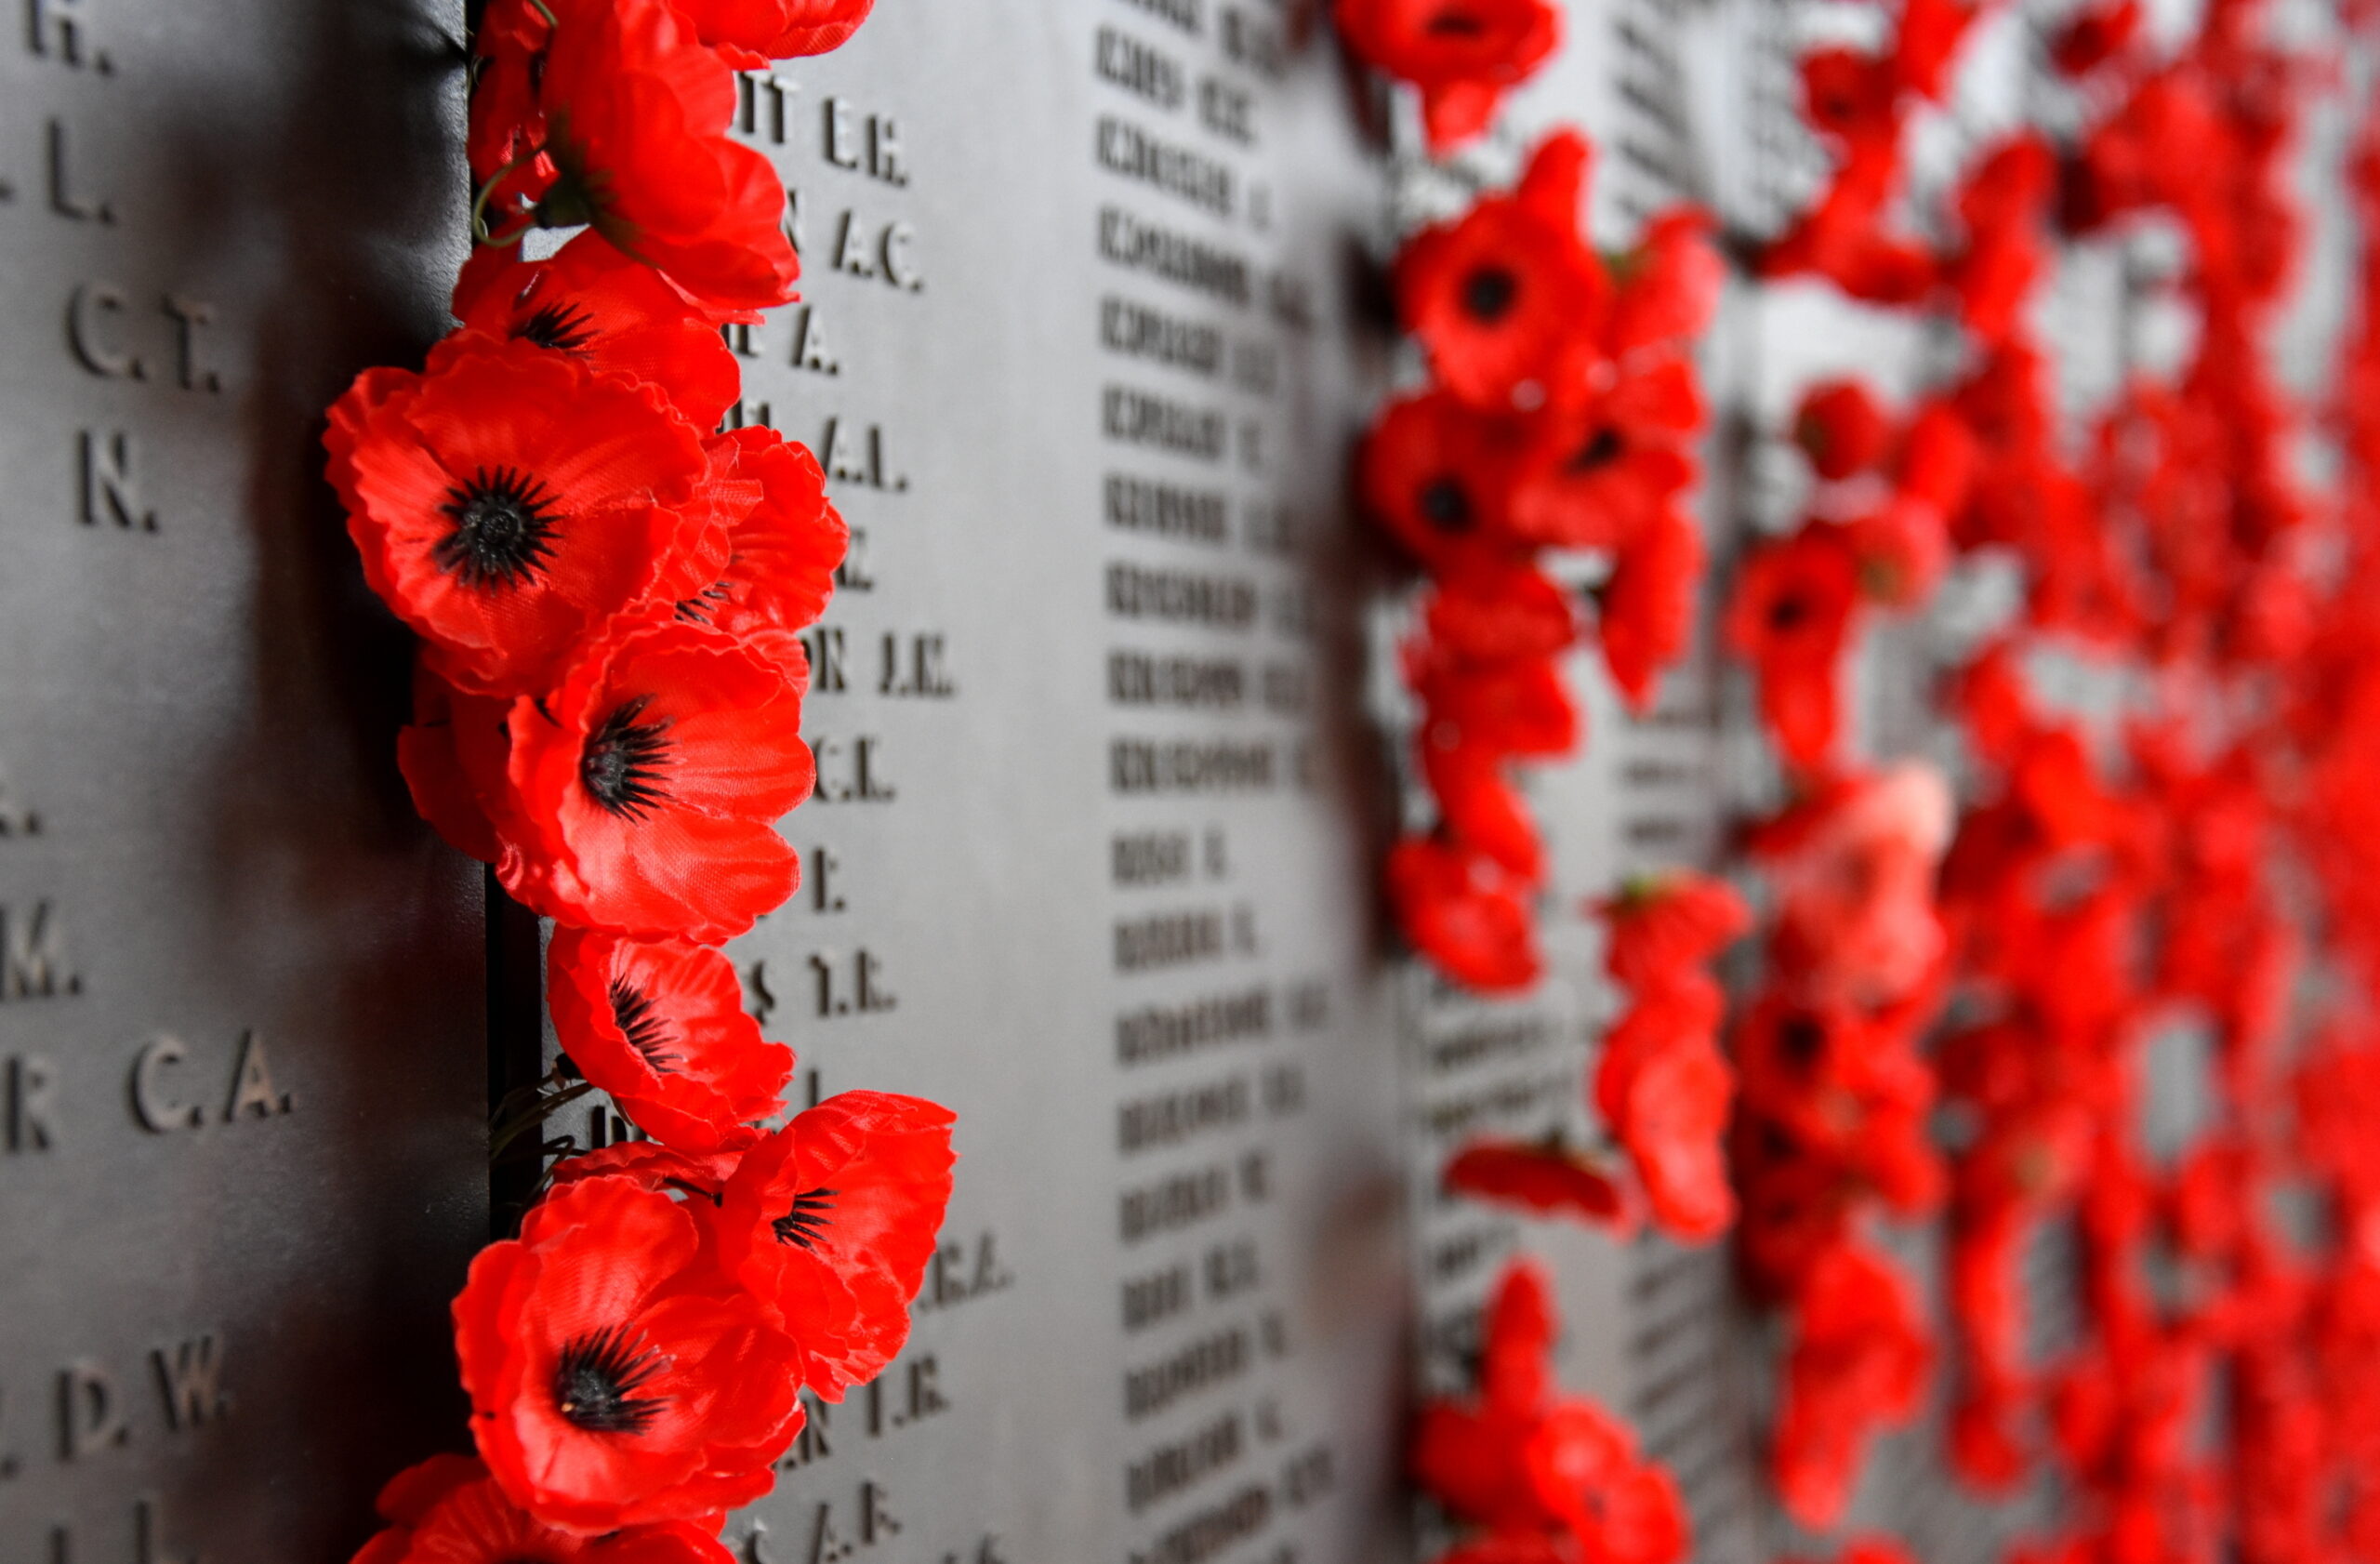 Remembrance Day service to go ahead in a modified form